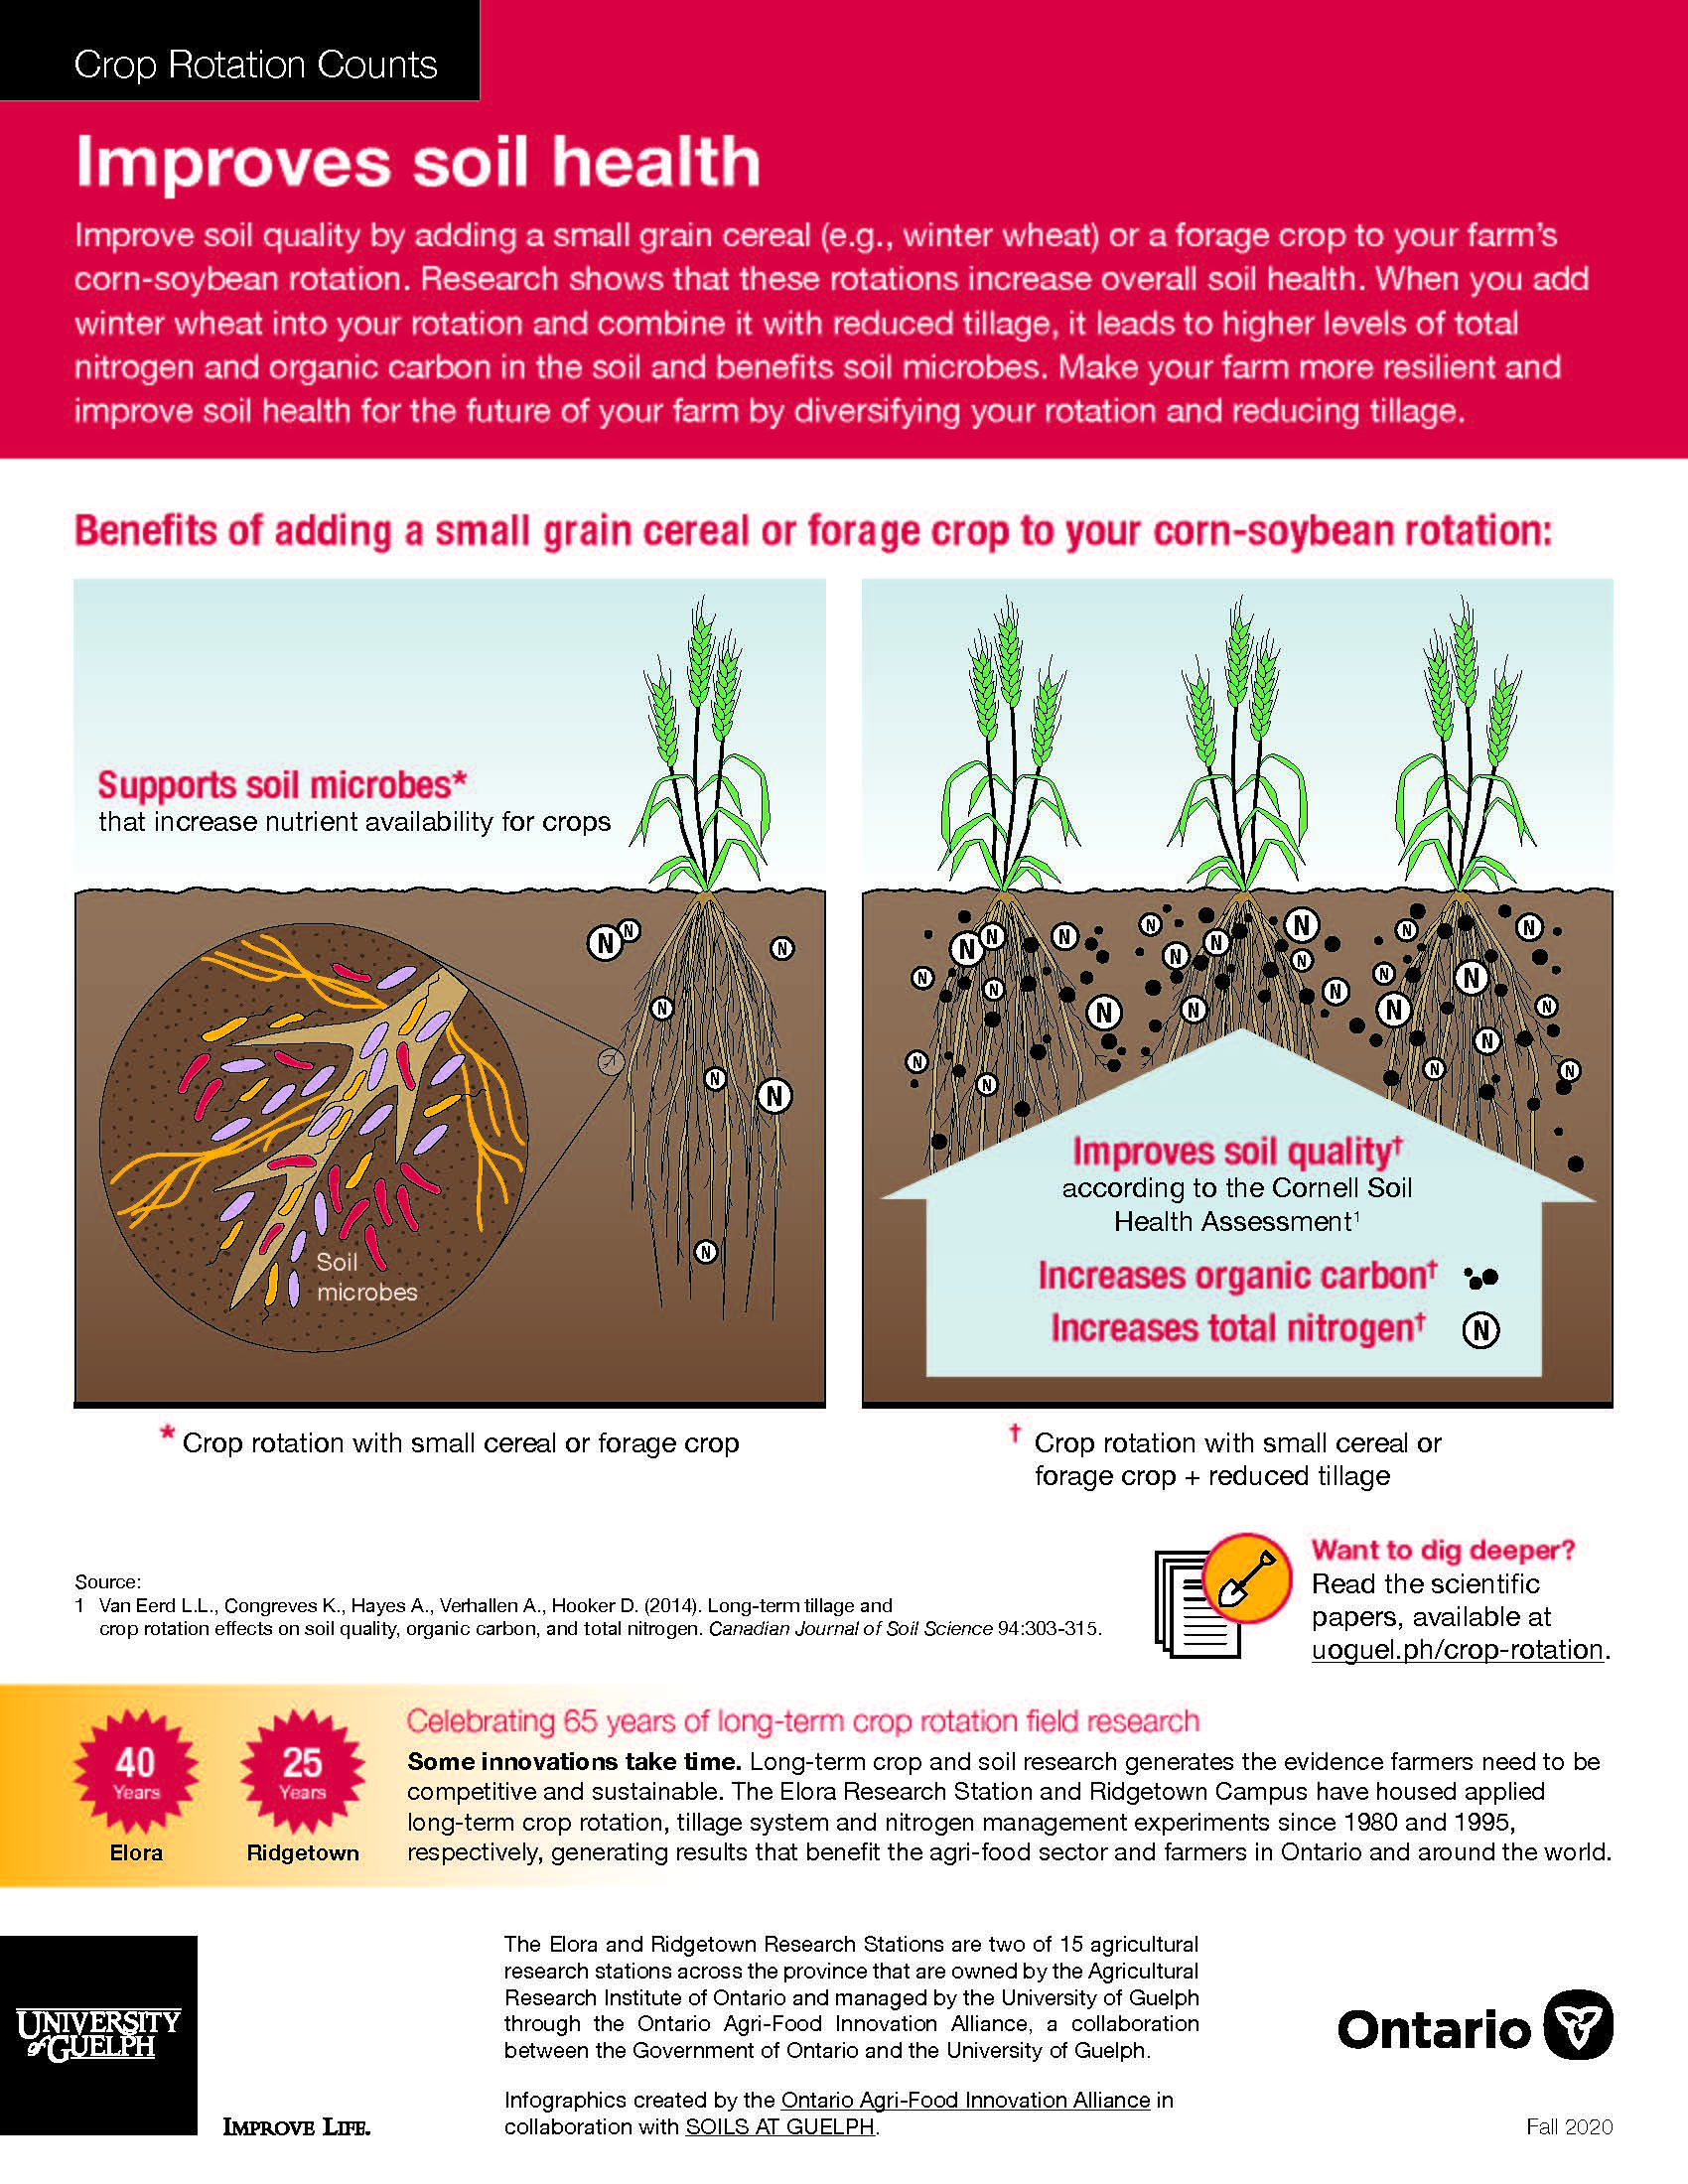 Crop Rotation Counts: Improves Soil Health infographic. Text version follows.